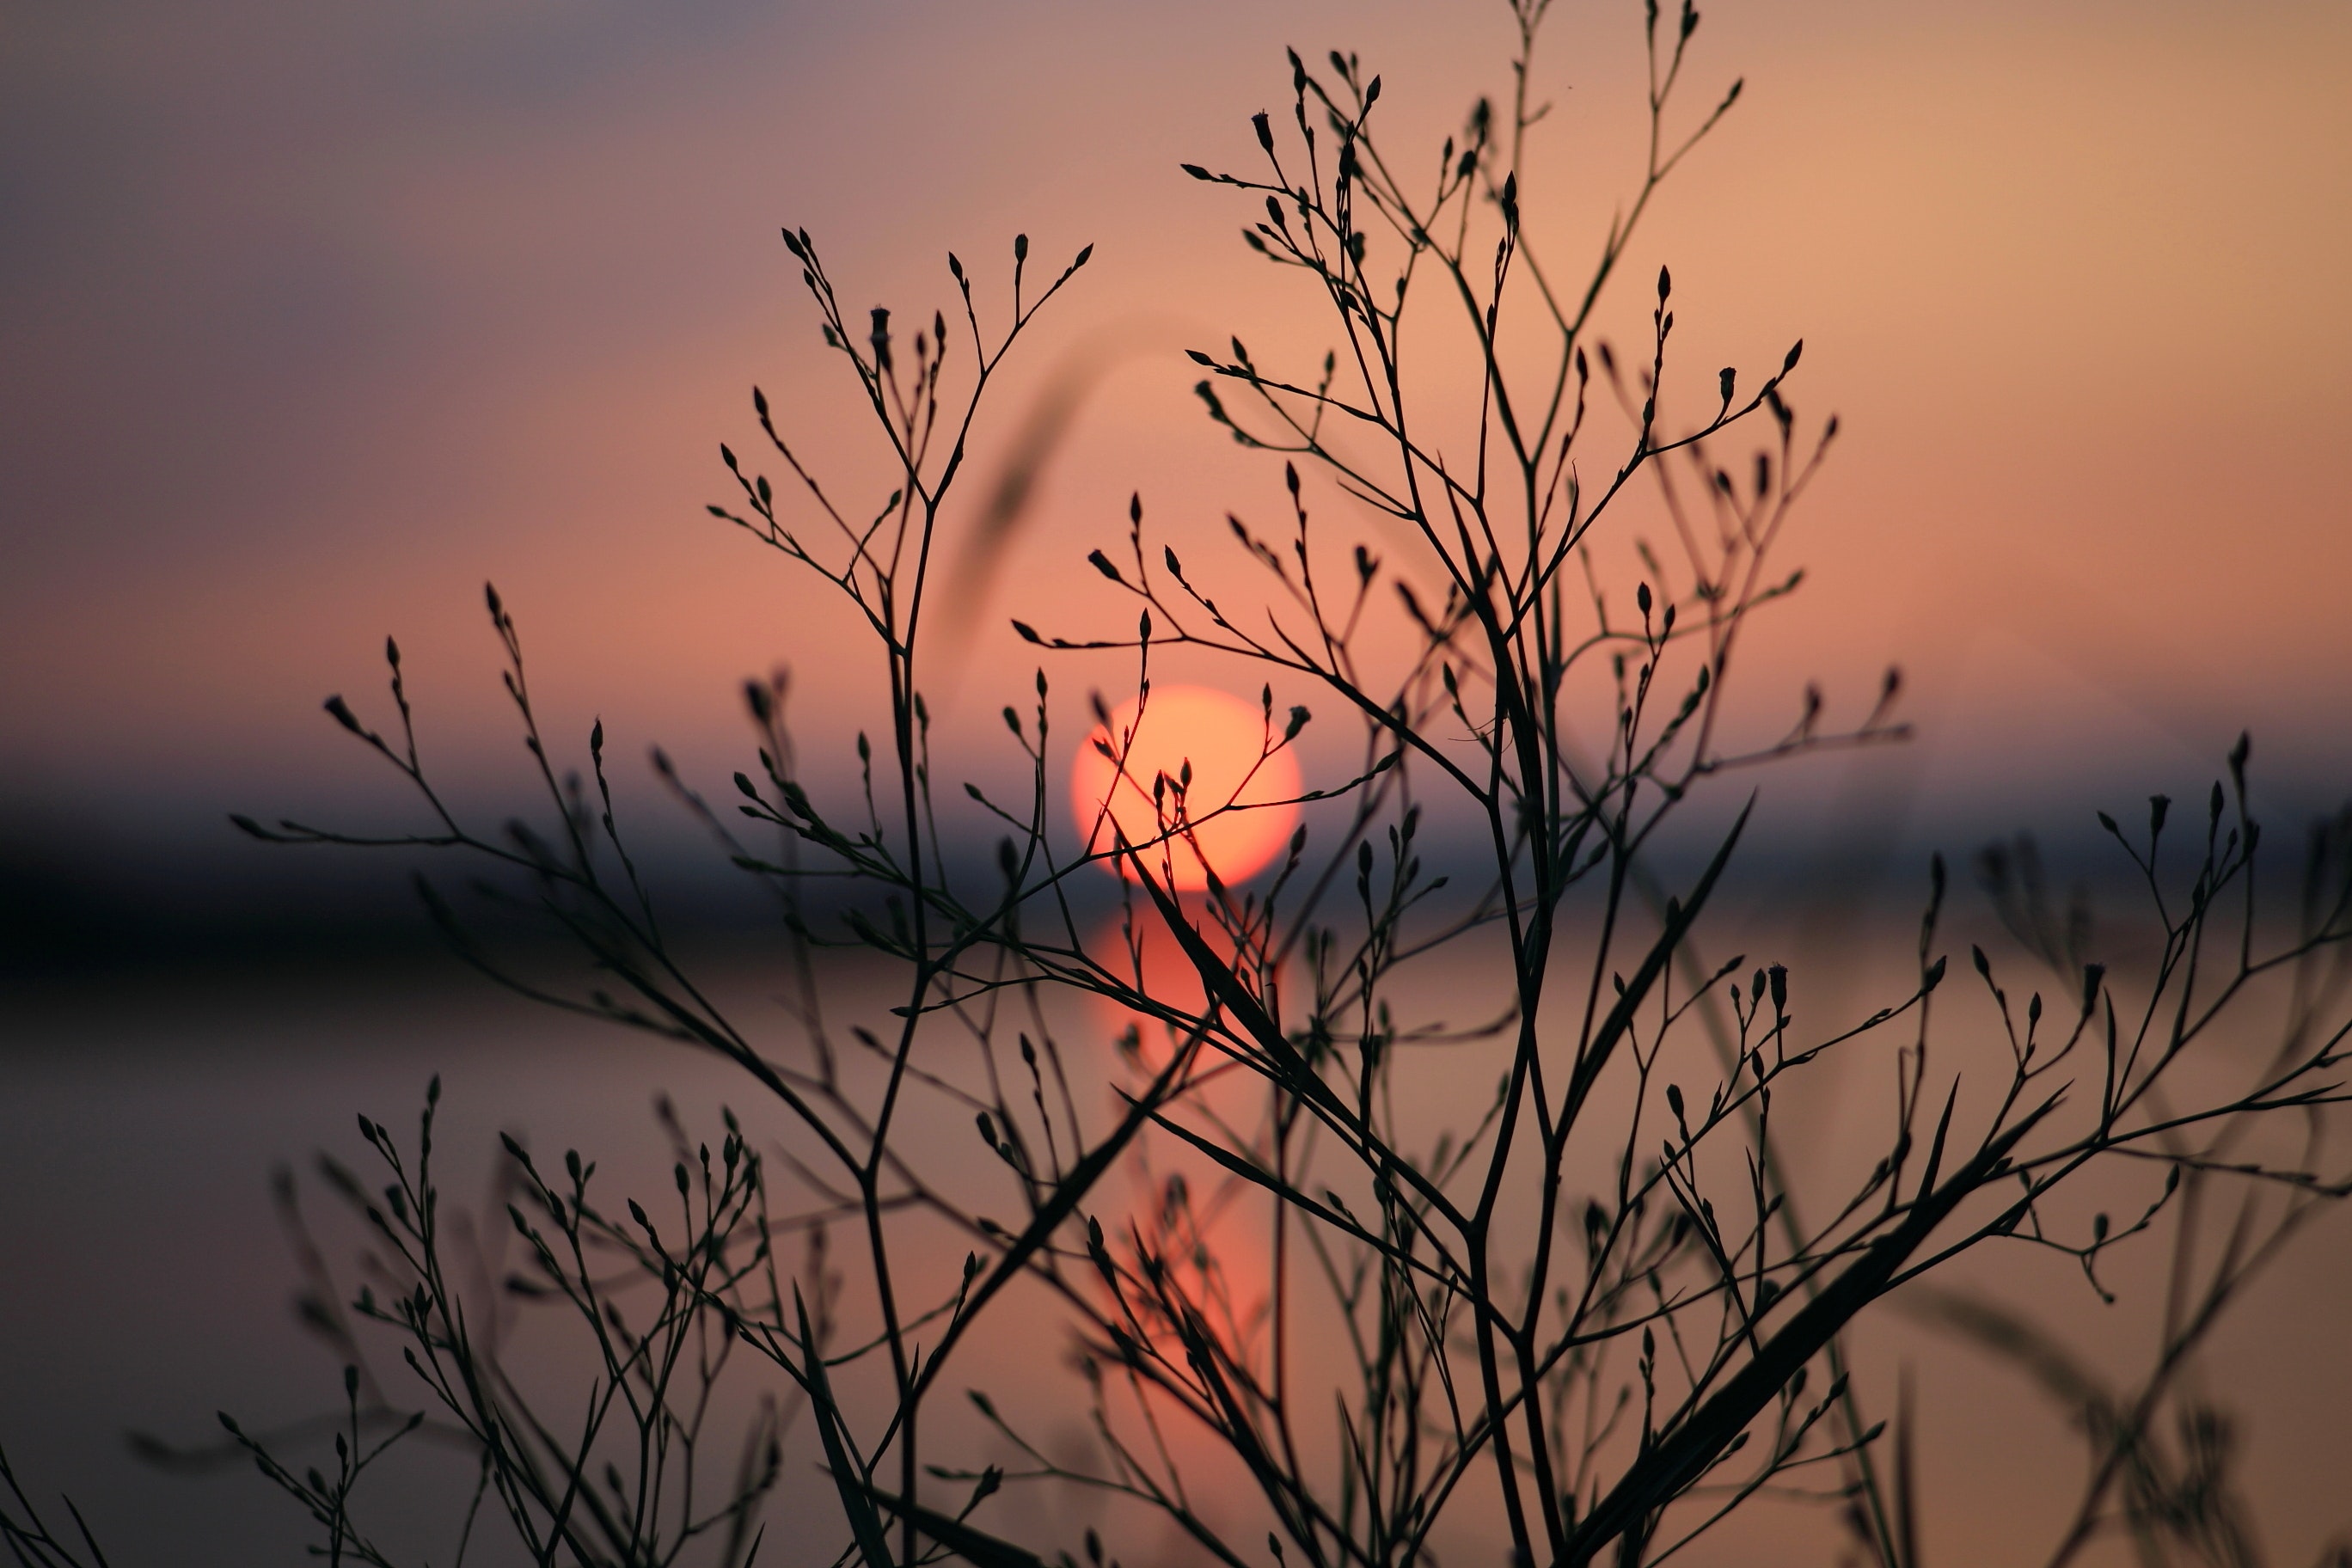 Silhouette of bare tree during sunset photo